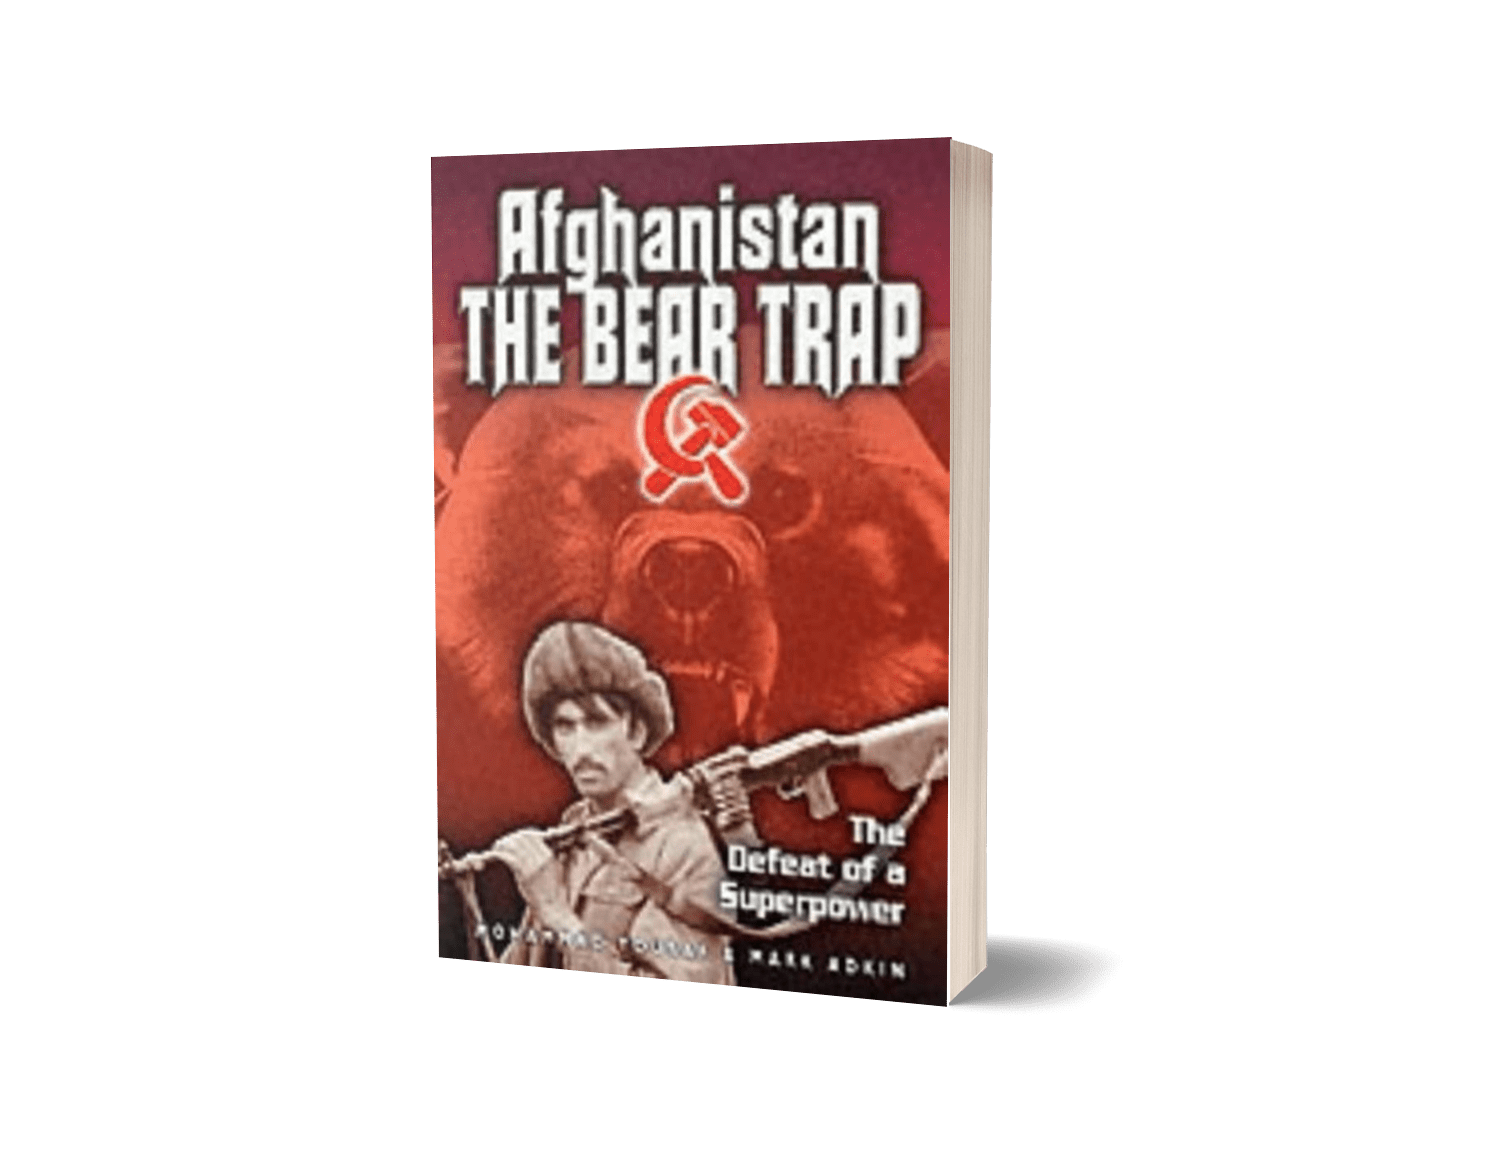 Afghanistan The Bear Trap by Muhammad Yousaf